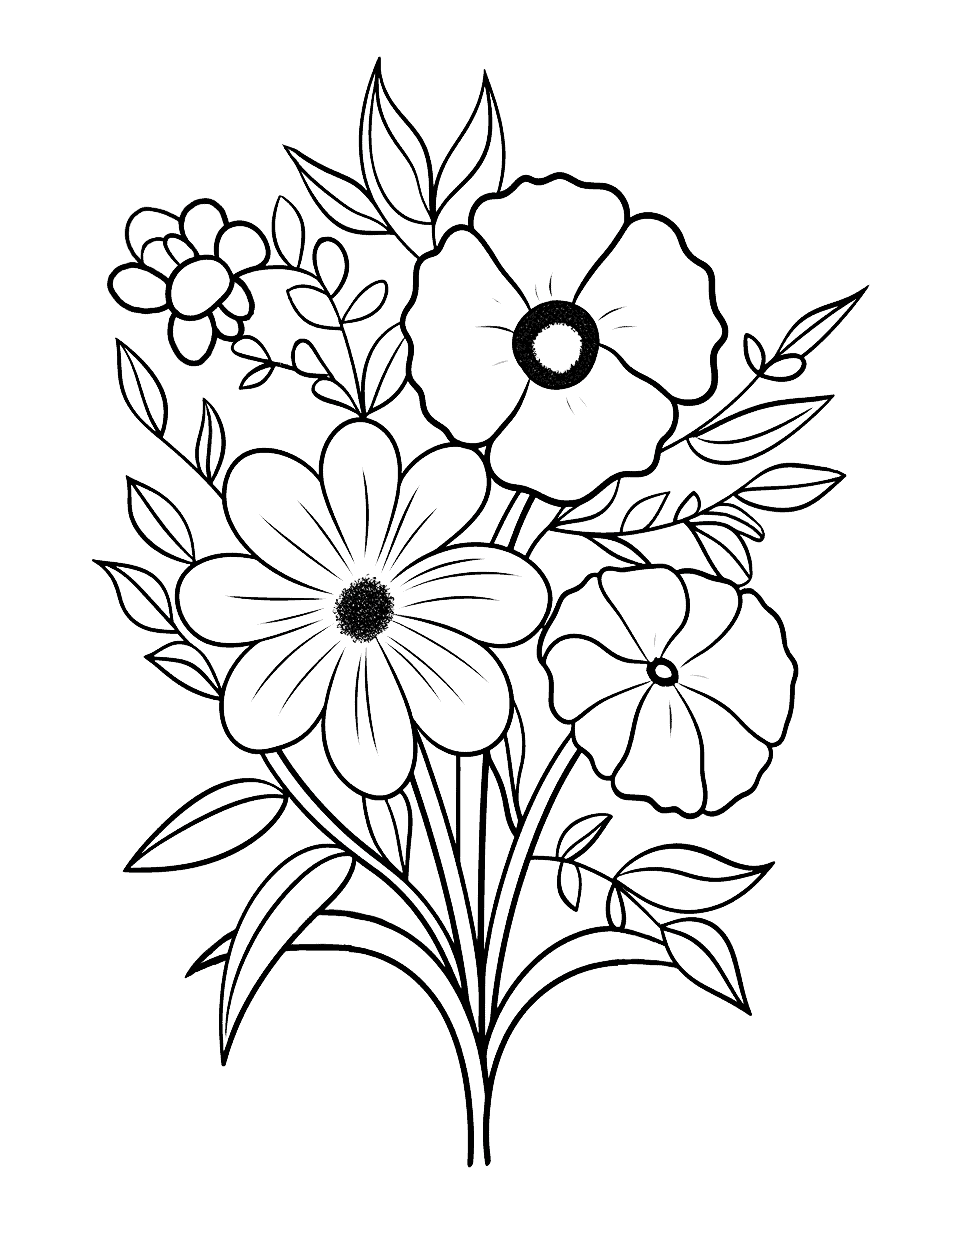 Spring Flower Drawing Coloring Page - A realistic drawing of spring flowers.